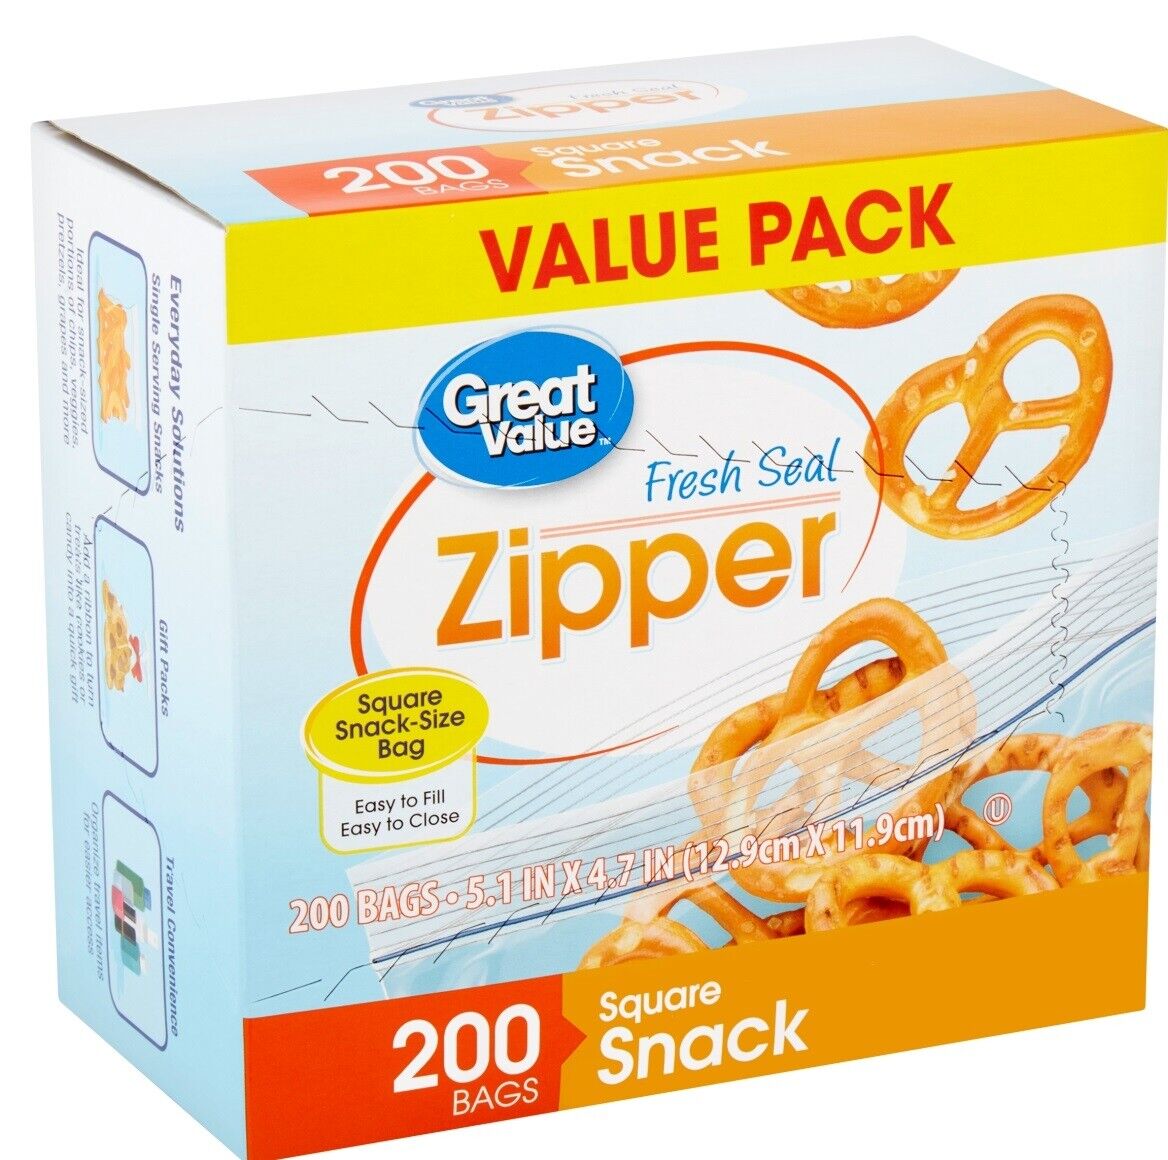 Great Value Bags Zipper Square Snack 200pk